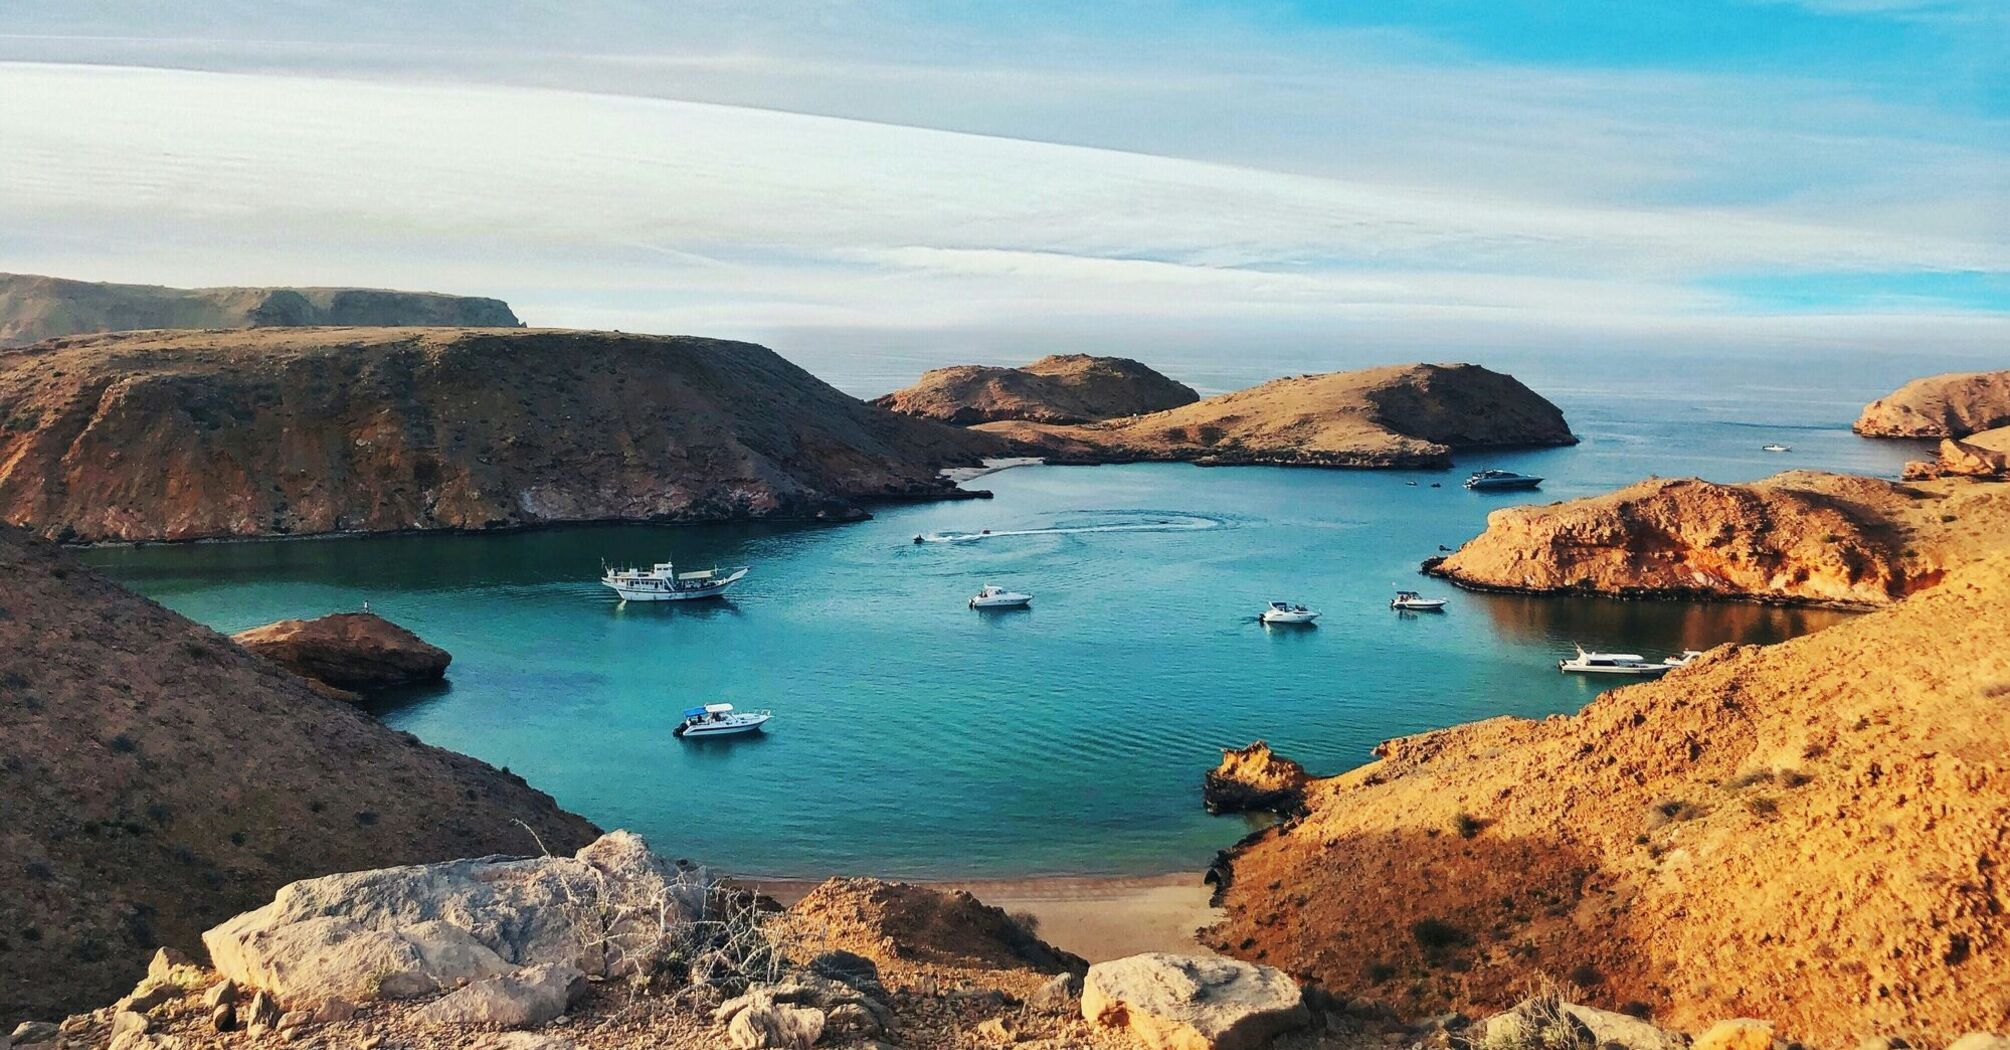 Picturesque view of a serene bay with boats on the clear waters of the Gulf of Oman, surrounded by rugged hills under a blue sky